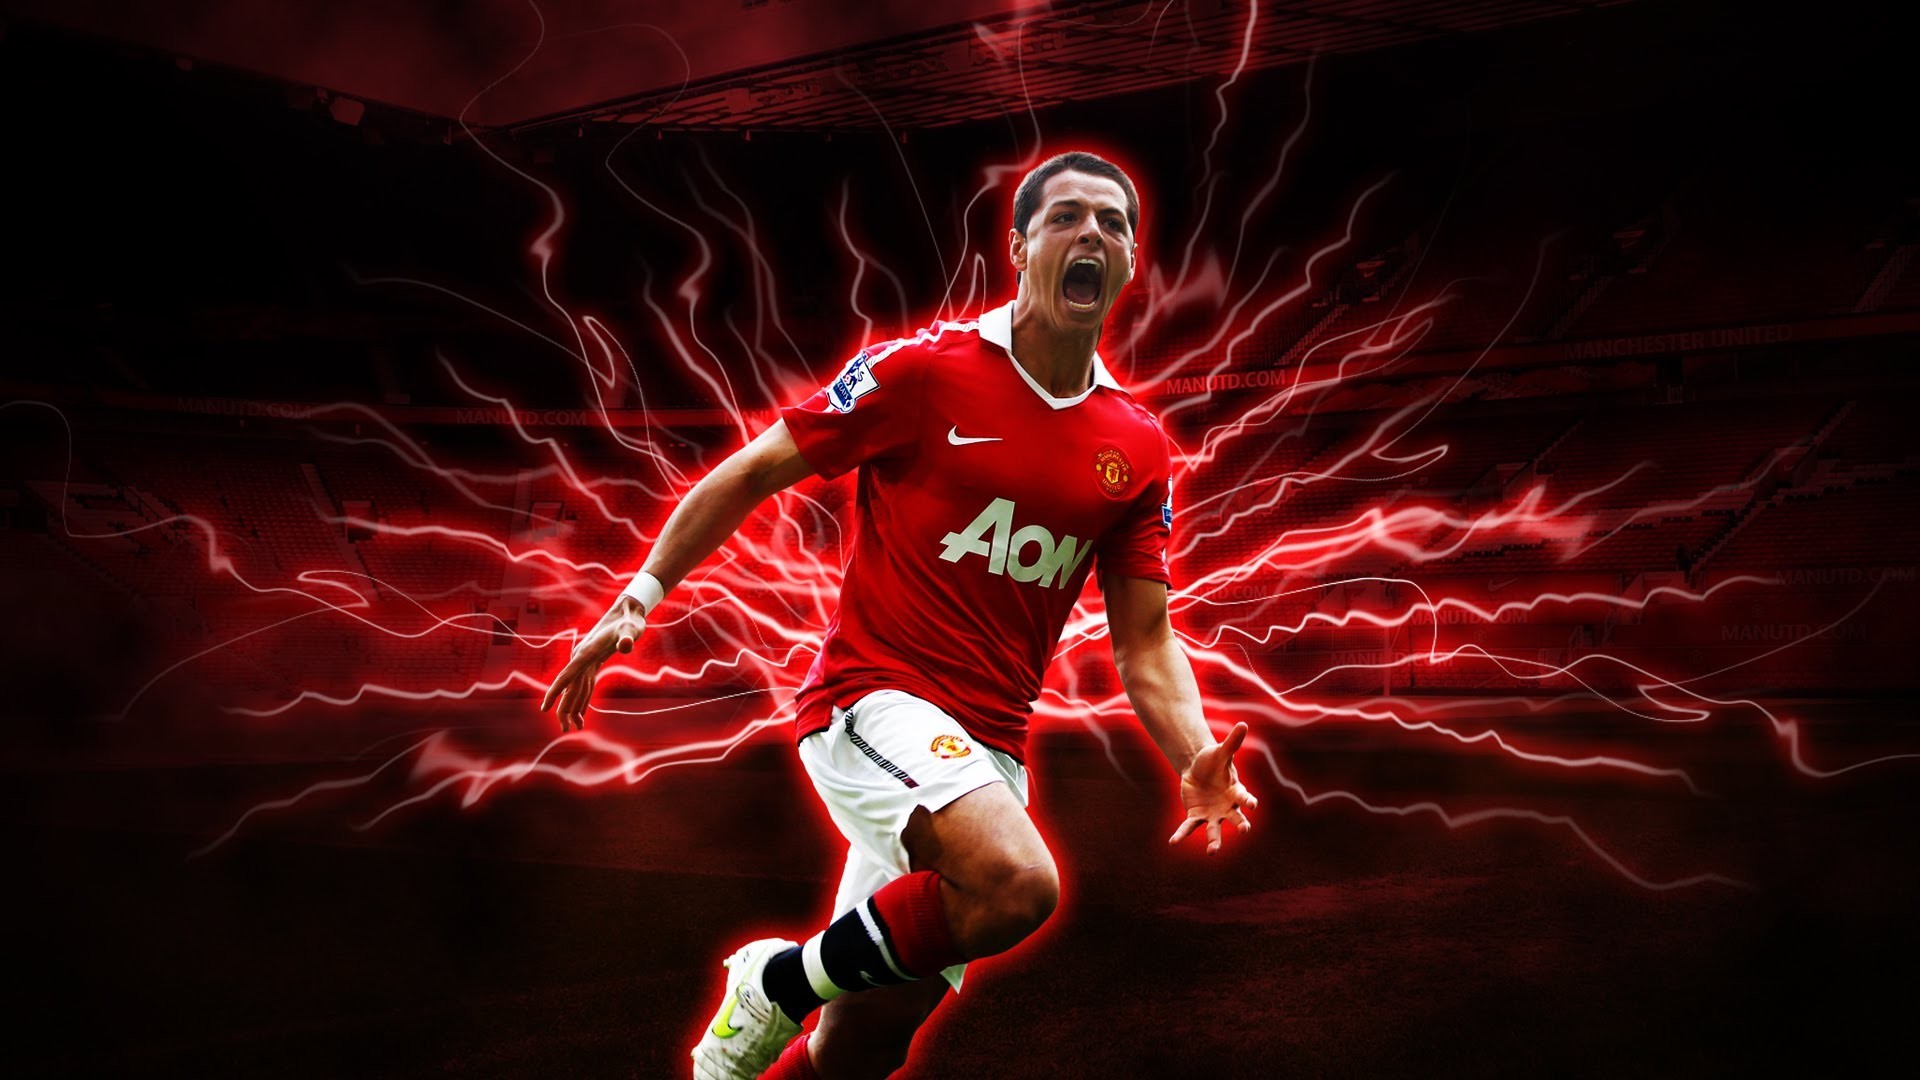 1920x1080 Chicharito (Javier HernÃ¡ndez) wallpaper with abstract lines in AdobeÂ®  PhotoshopÂ® software - YouTube